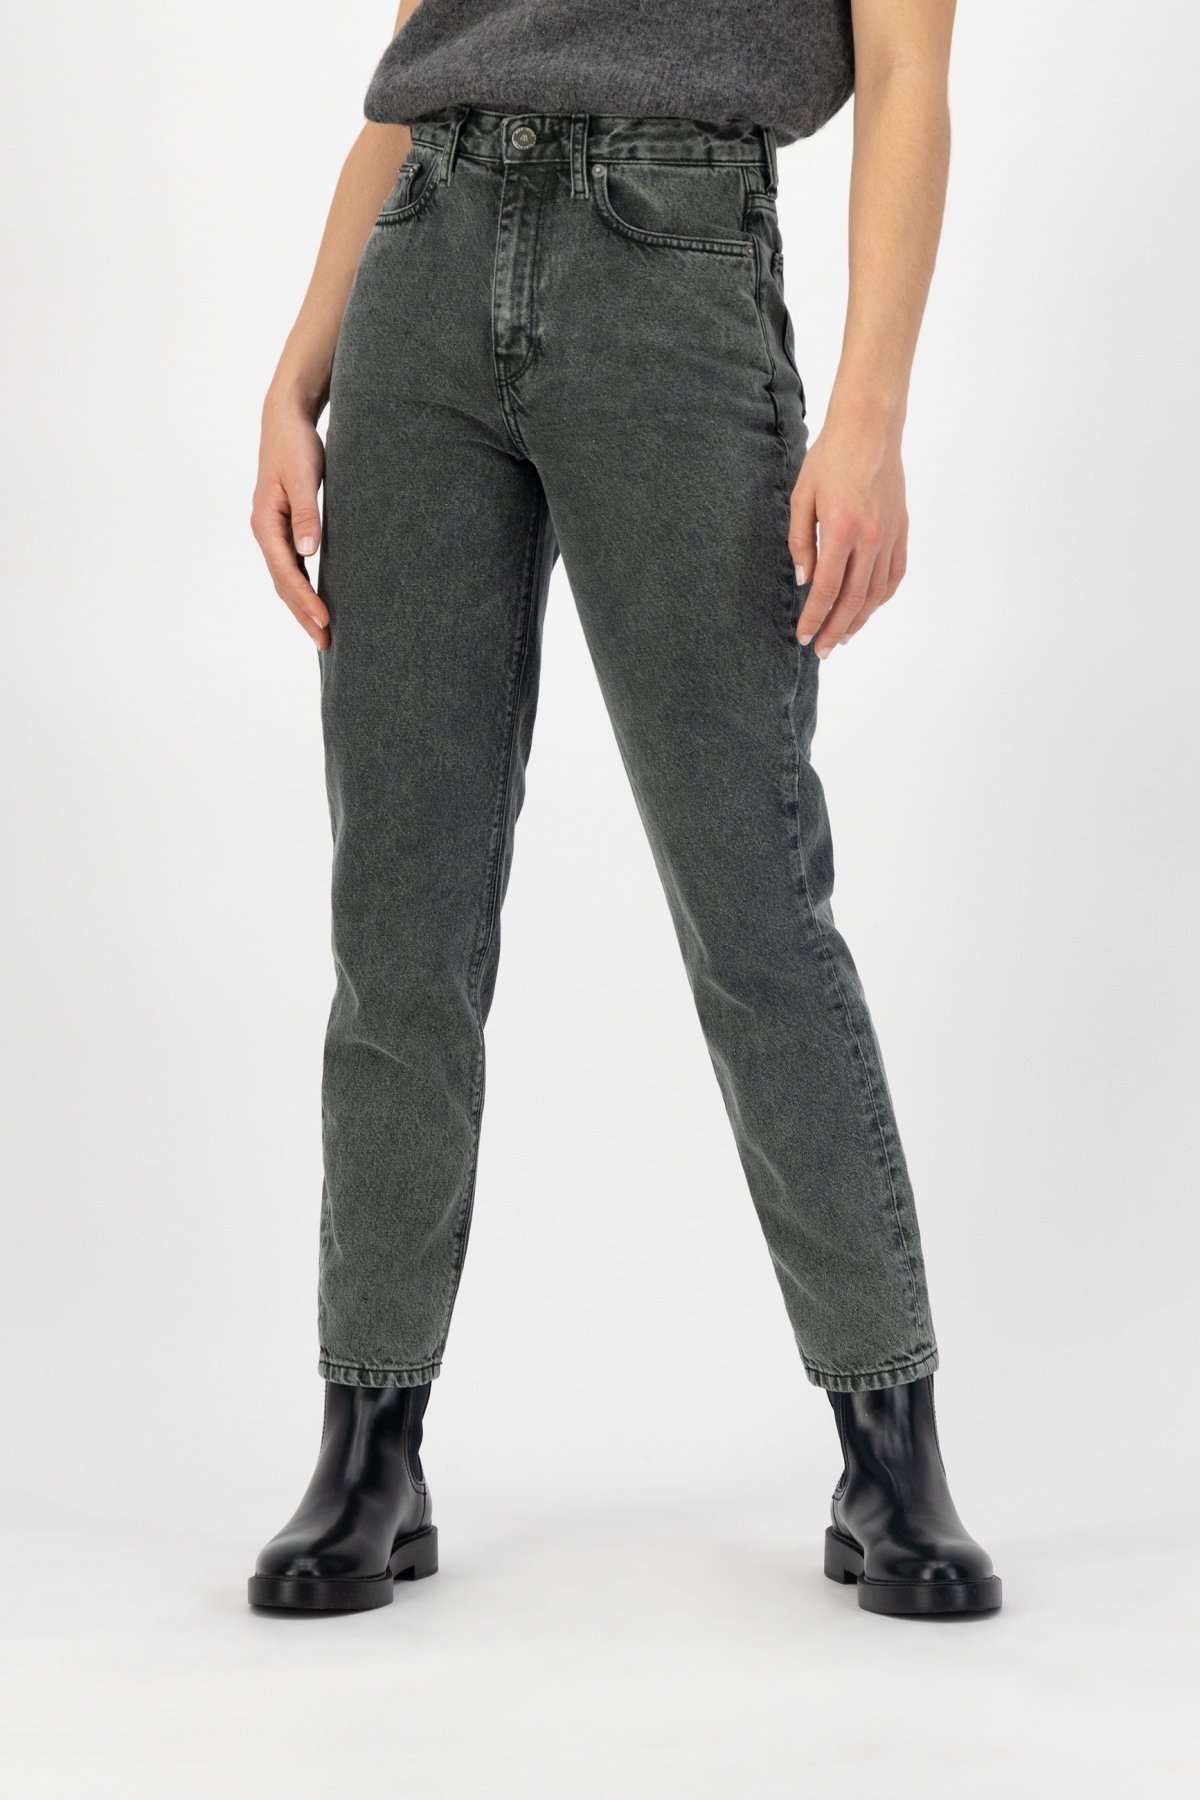 MUD Jeans dames vegan Mom Tapered Jeans Forest Groen